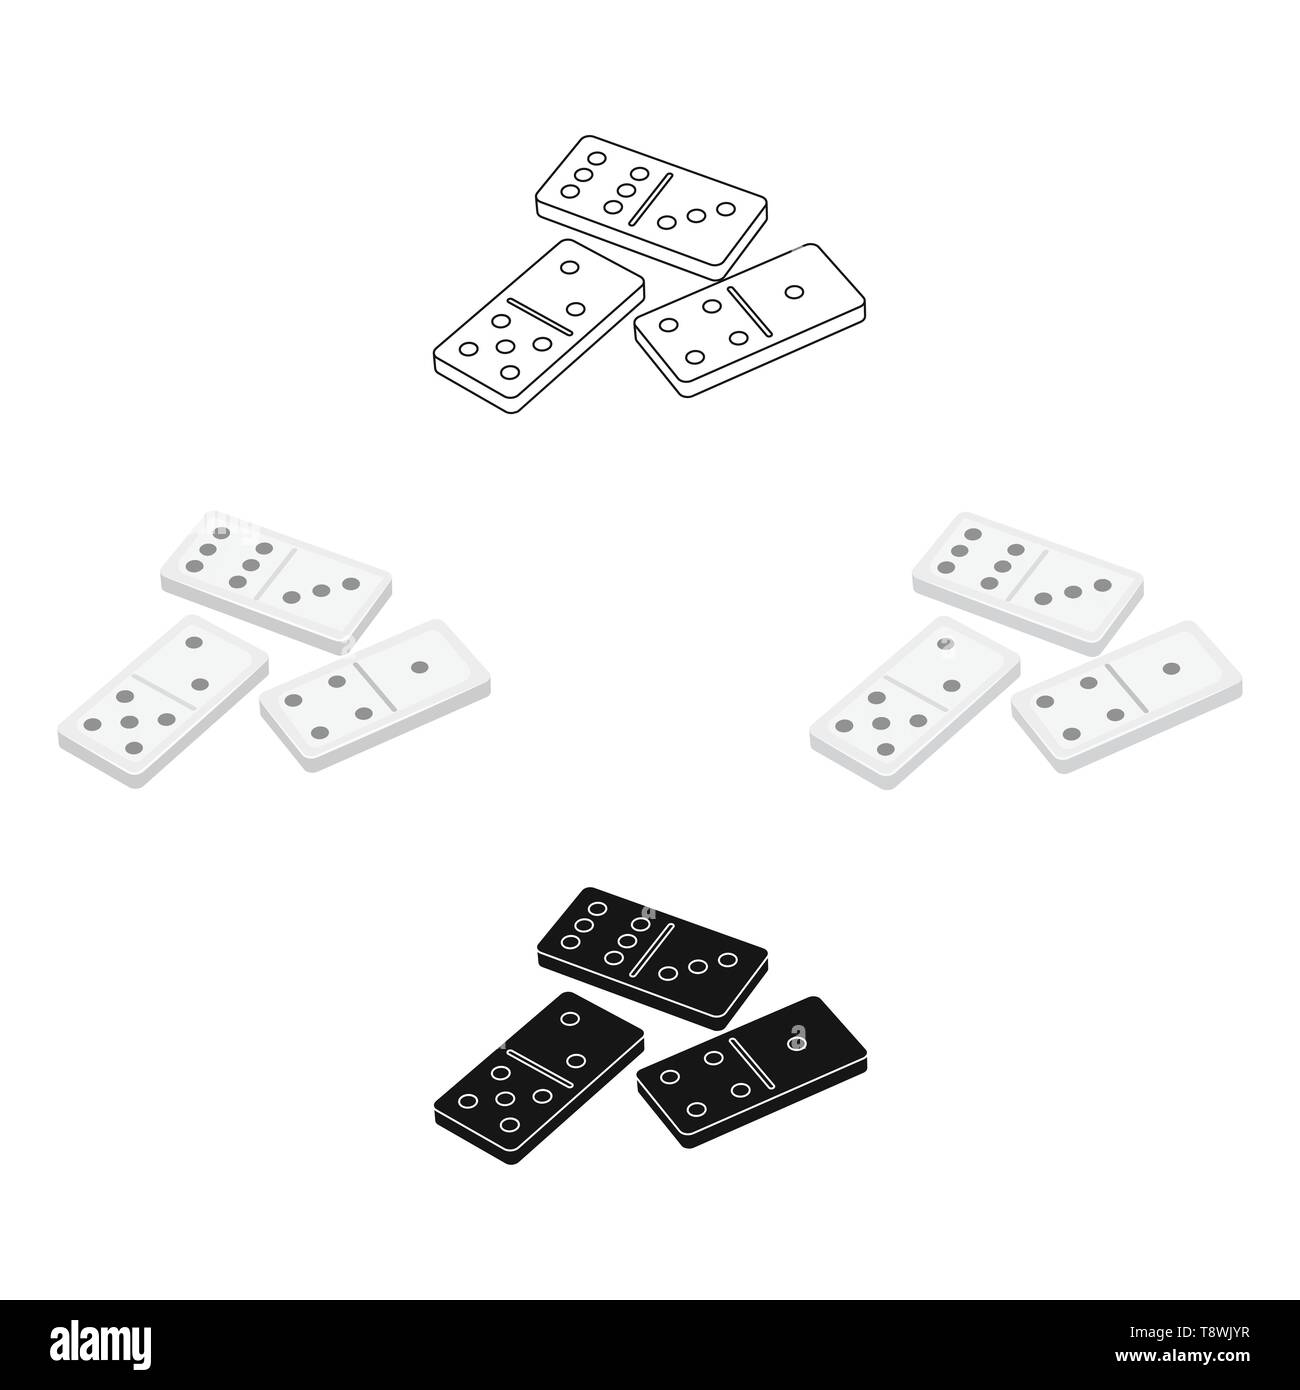 Premium Vector  Set white domino game block with shadow.